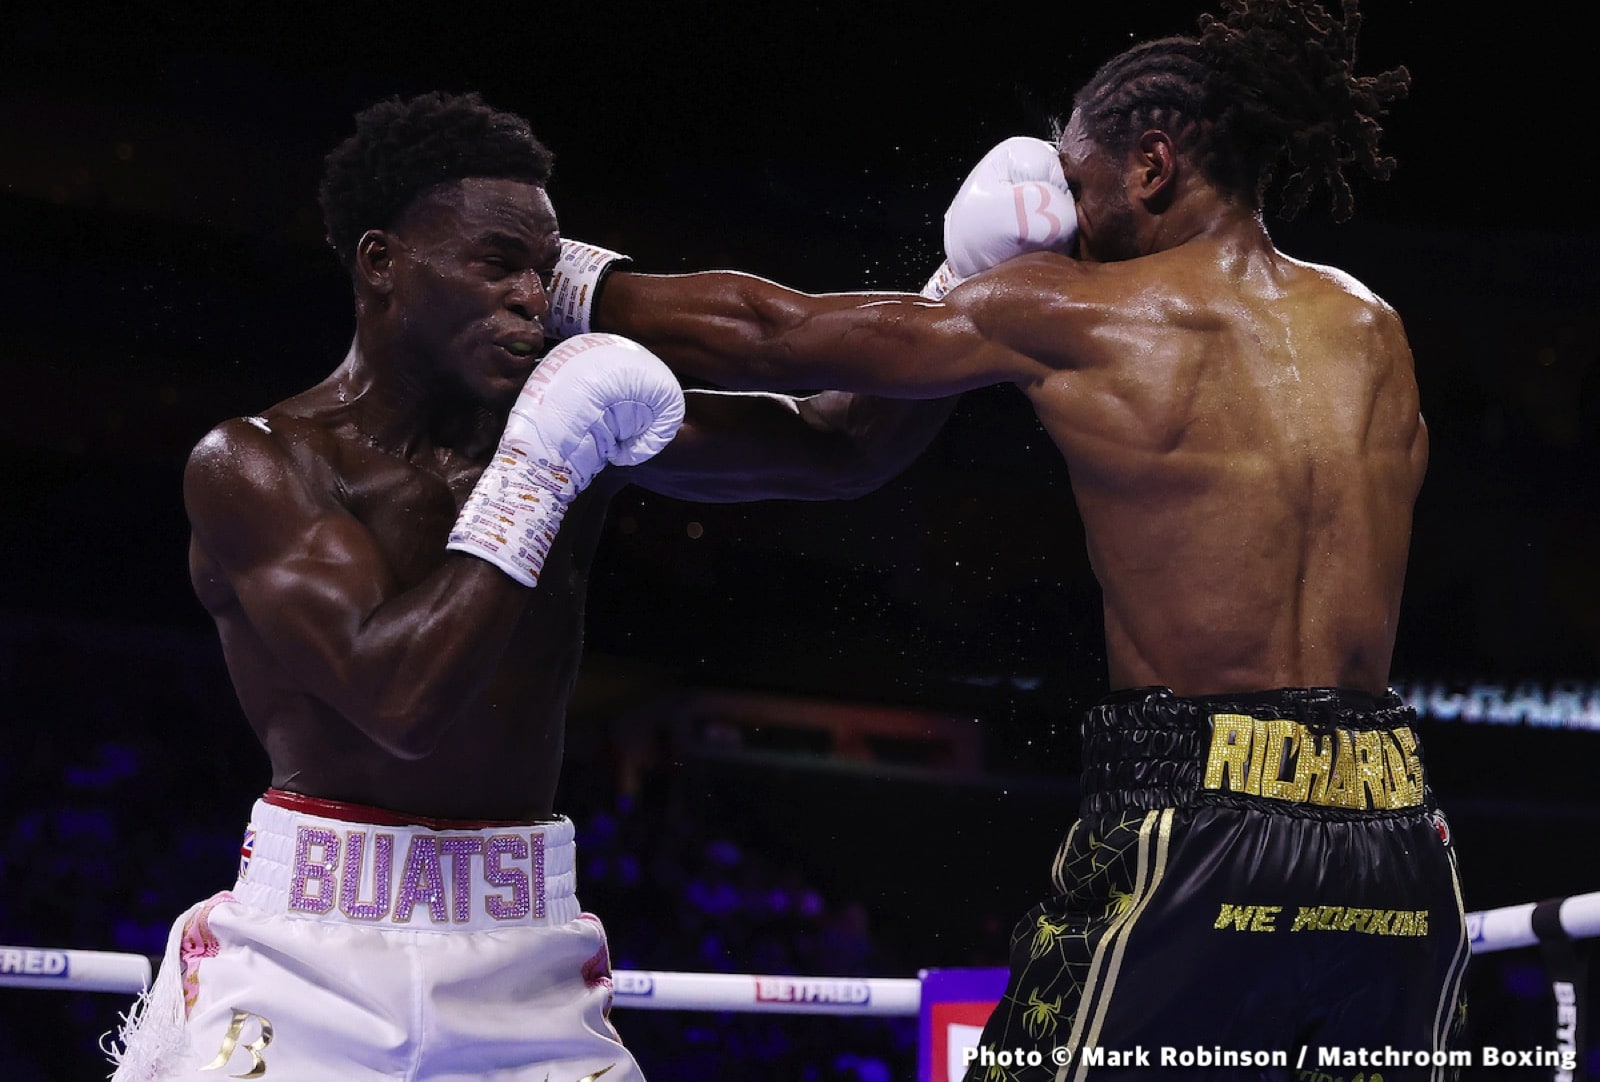 Buatsi vs. Richards LIVE action results from London